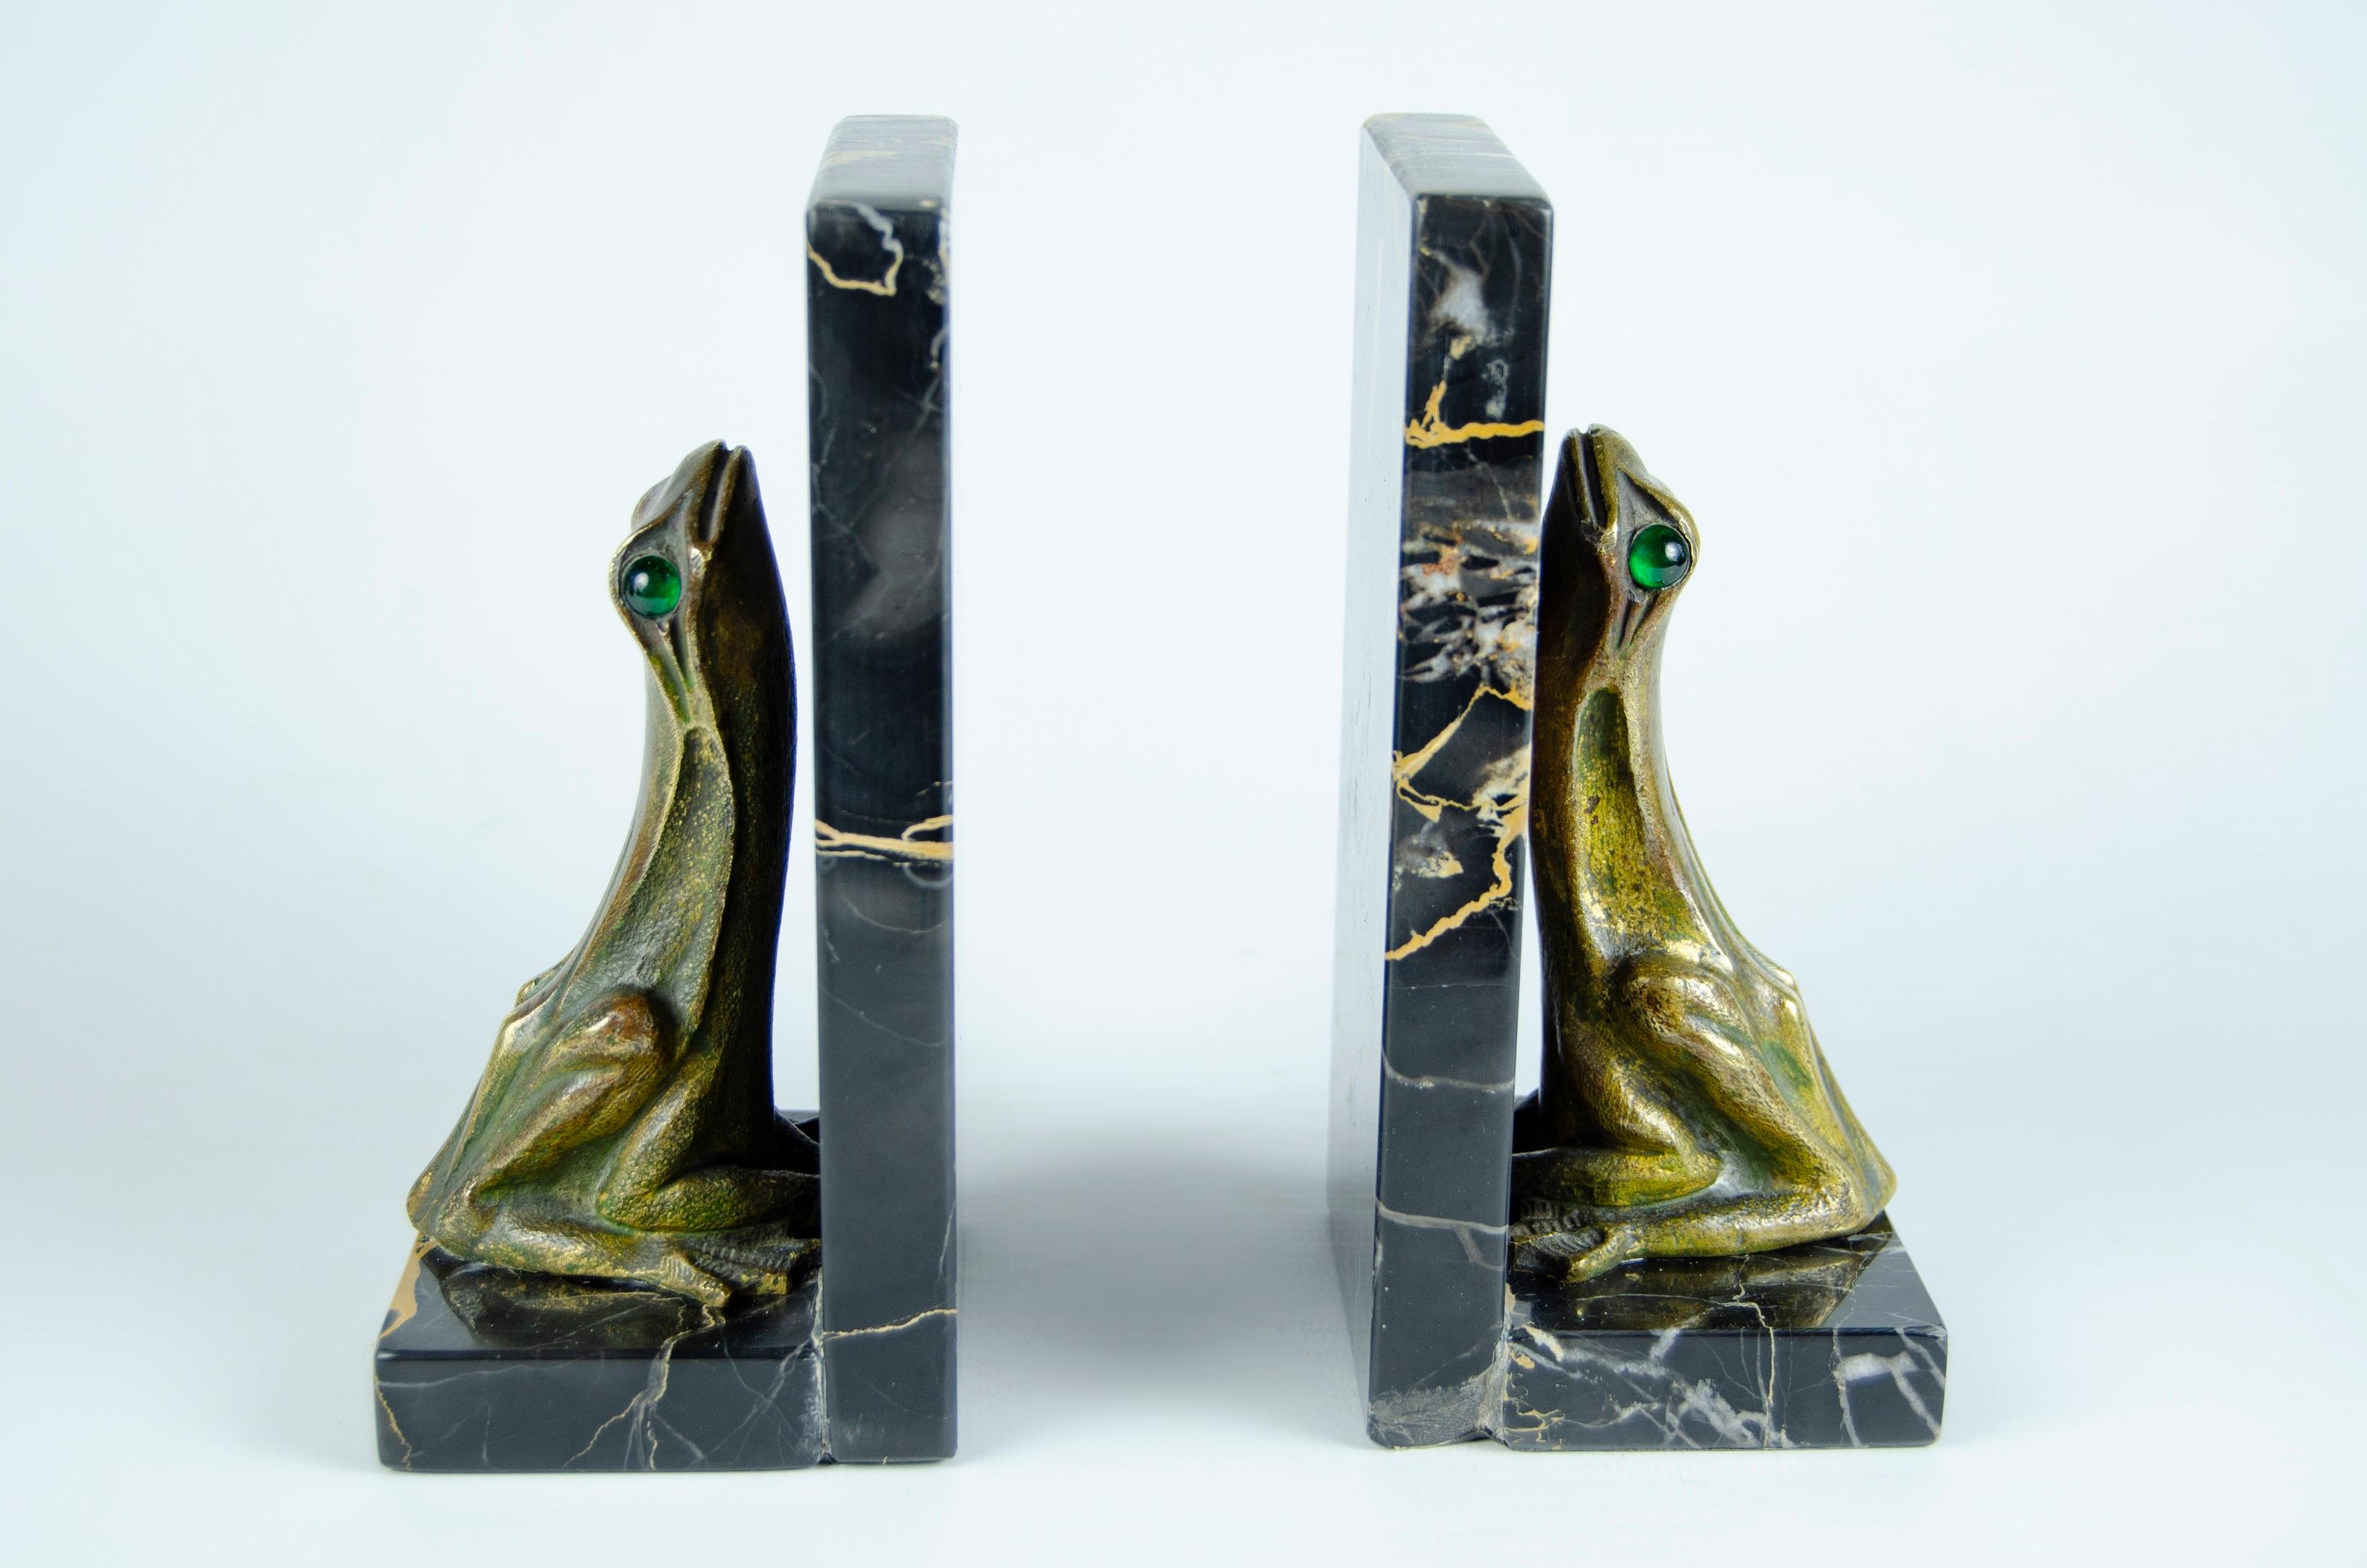 Pair of Art Nouveau Bookends Frogs
Bronze material, portoro marble and green glass in his eyes
Origin France, circa 1910
Very good condition with a small chip in its base